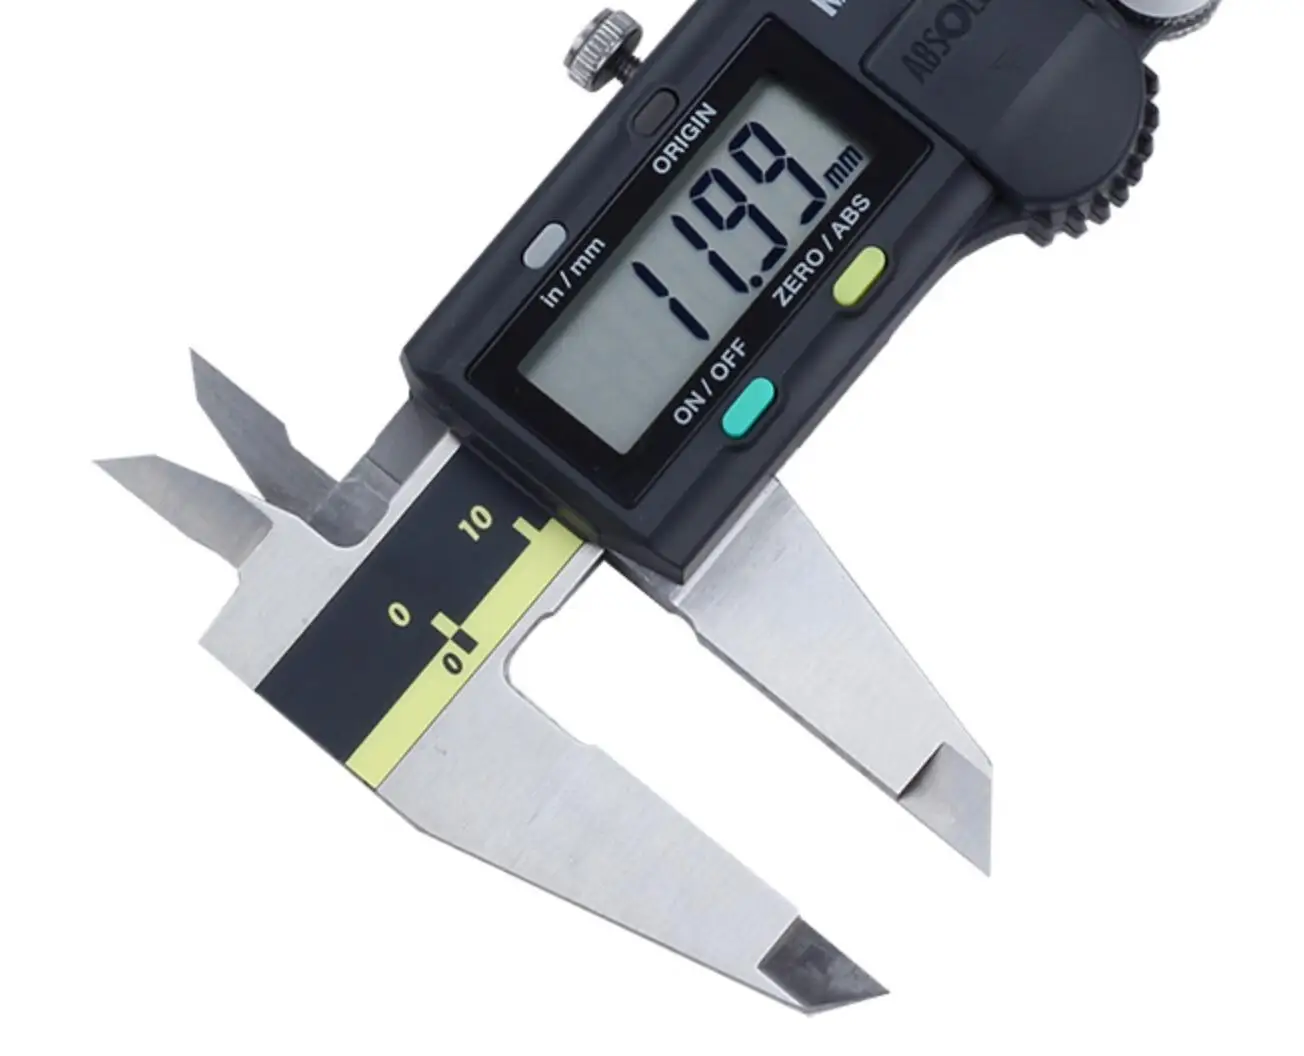 

NEW Digital Vernier Calipers 0-8inch 0-200mm 500-197-30 Caliper LCD Electronic Measuring Stainless Steel Tools